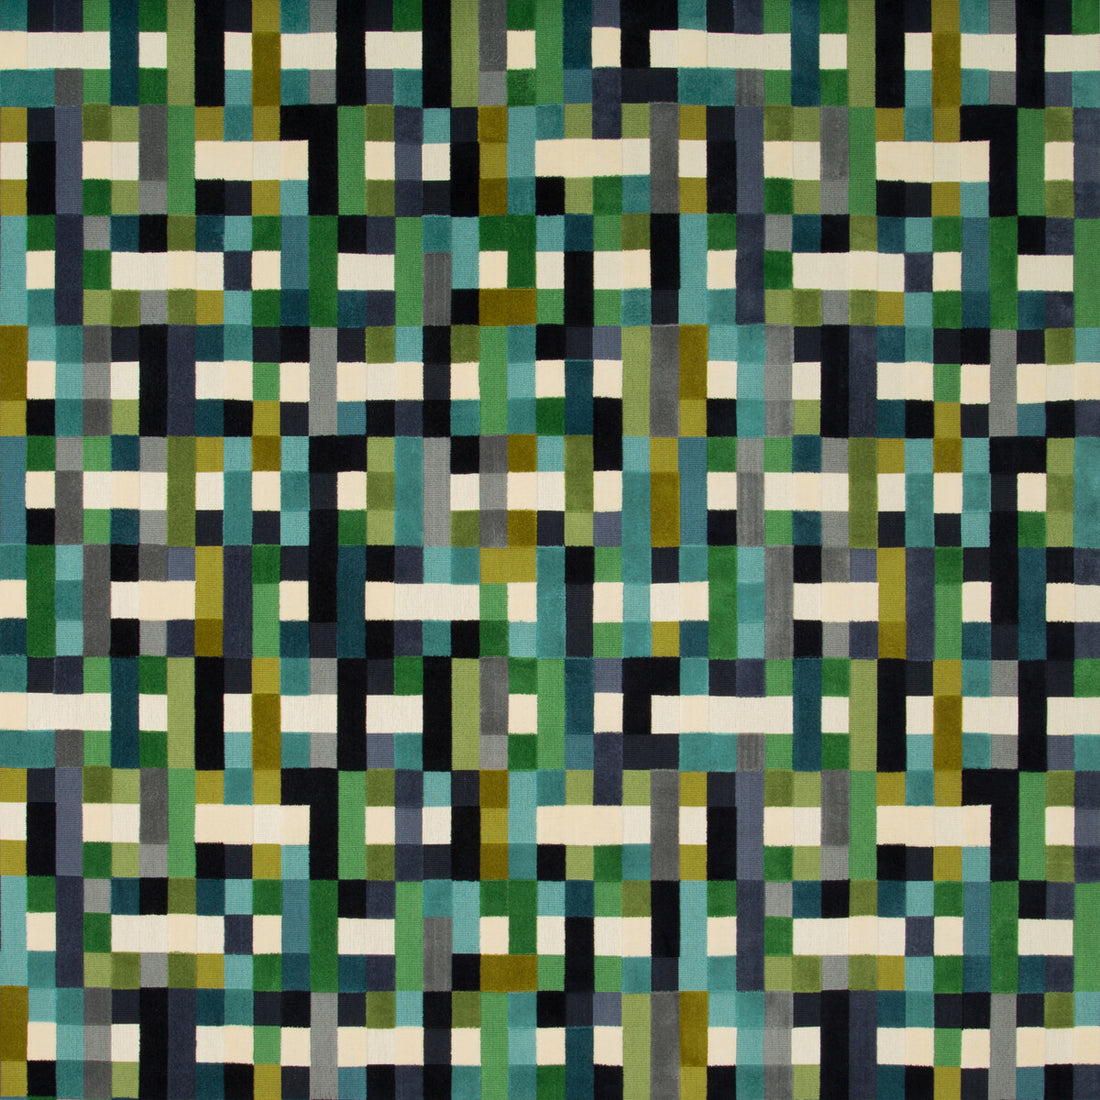 Abstract Moment fabric in peacock color - pattern 34916.315.0 - by Kravet Couture in the Modern Tailor collection